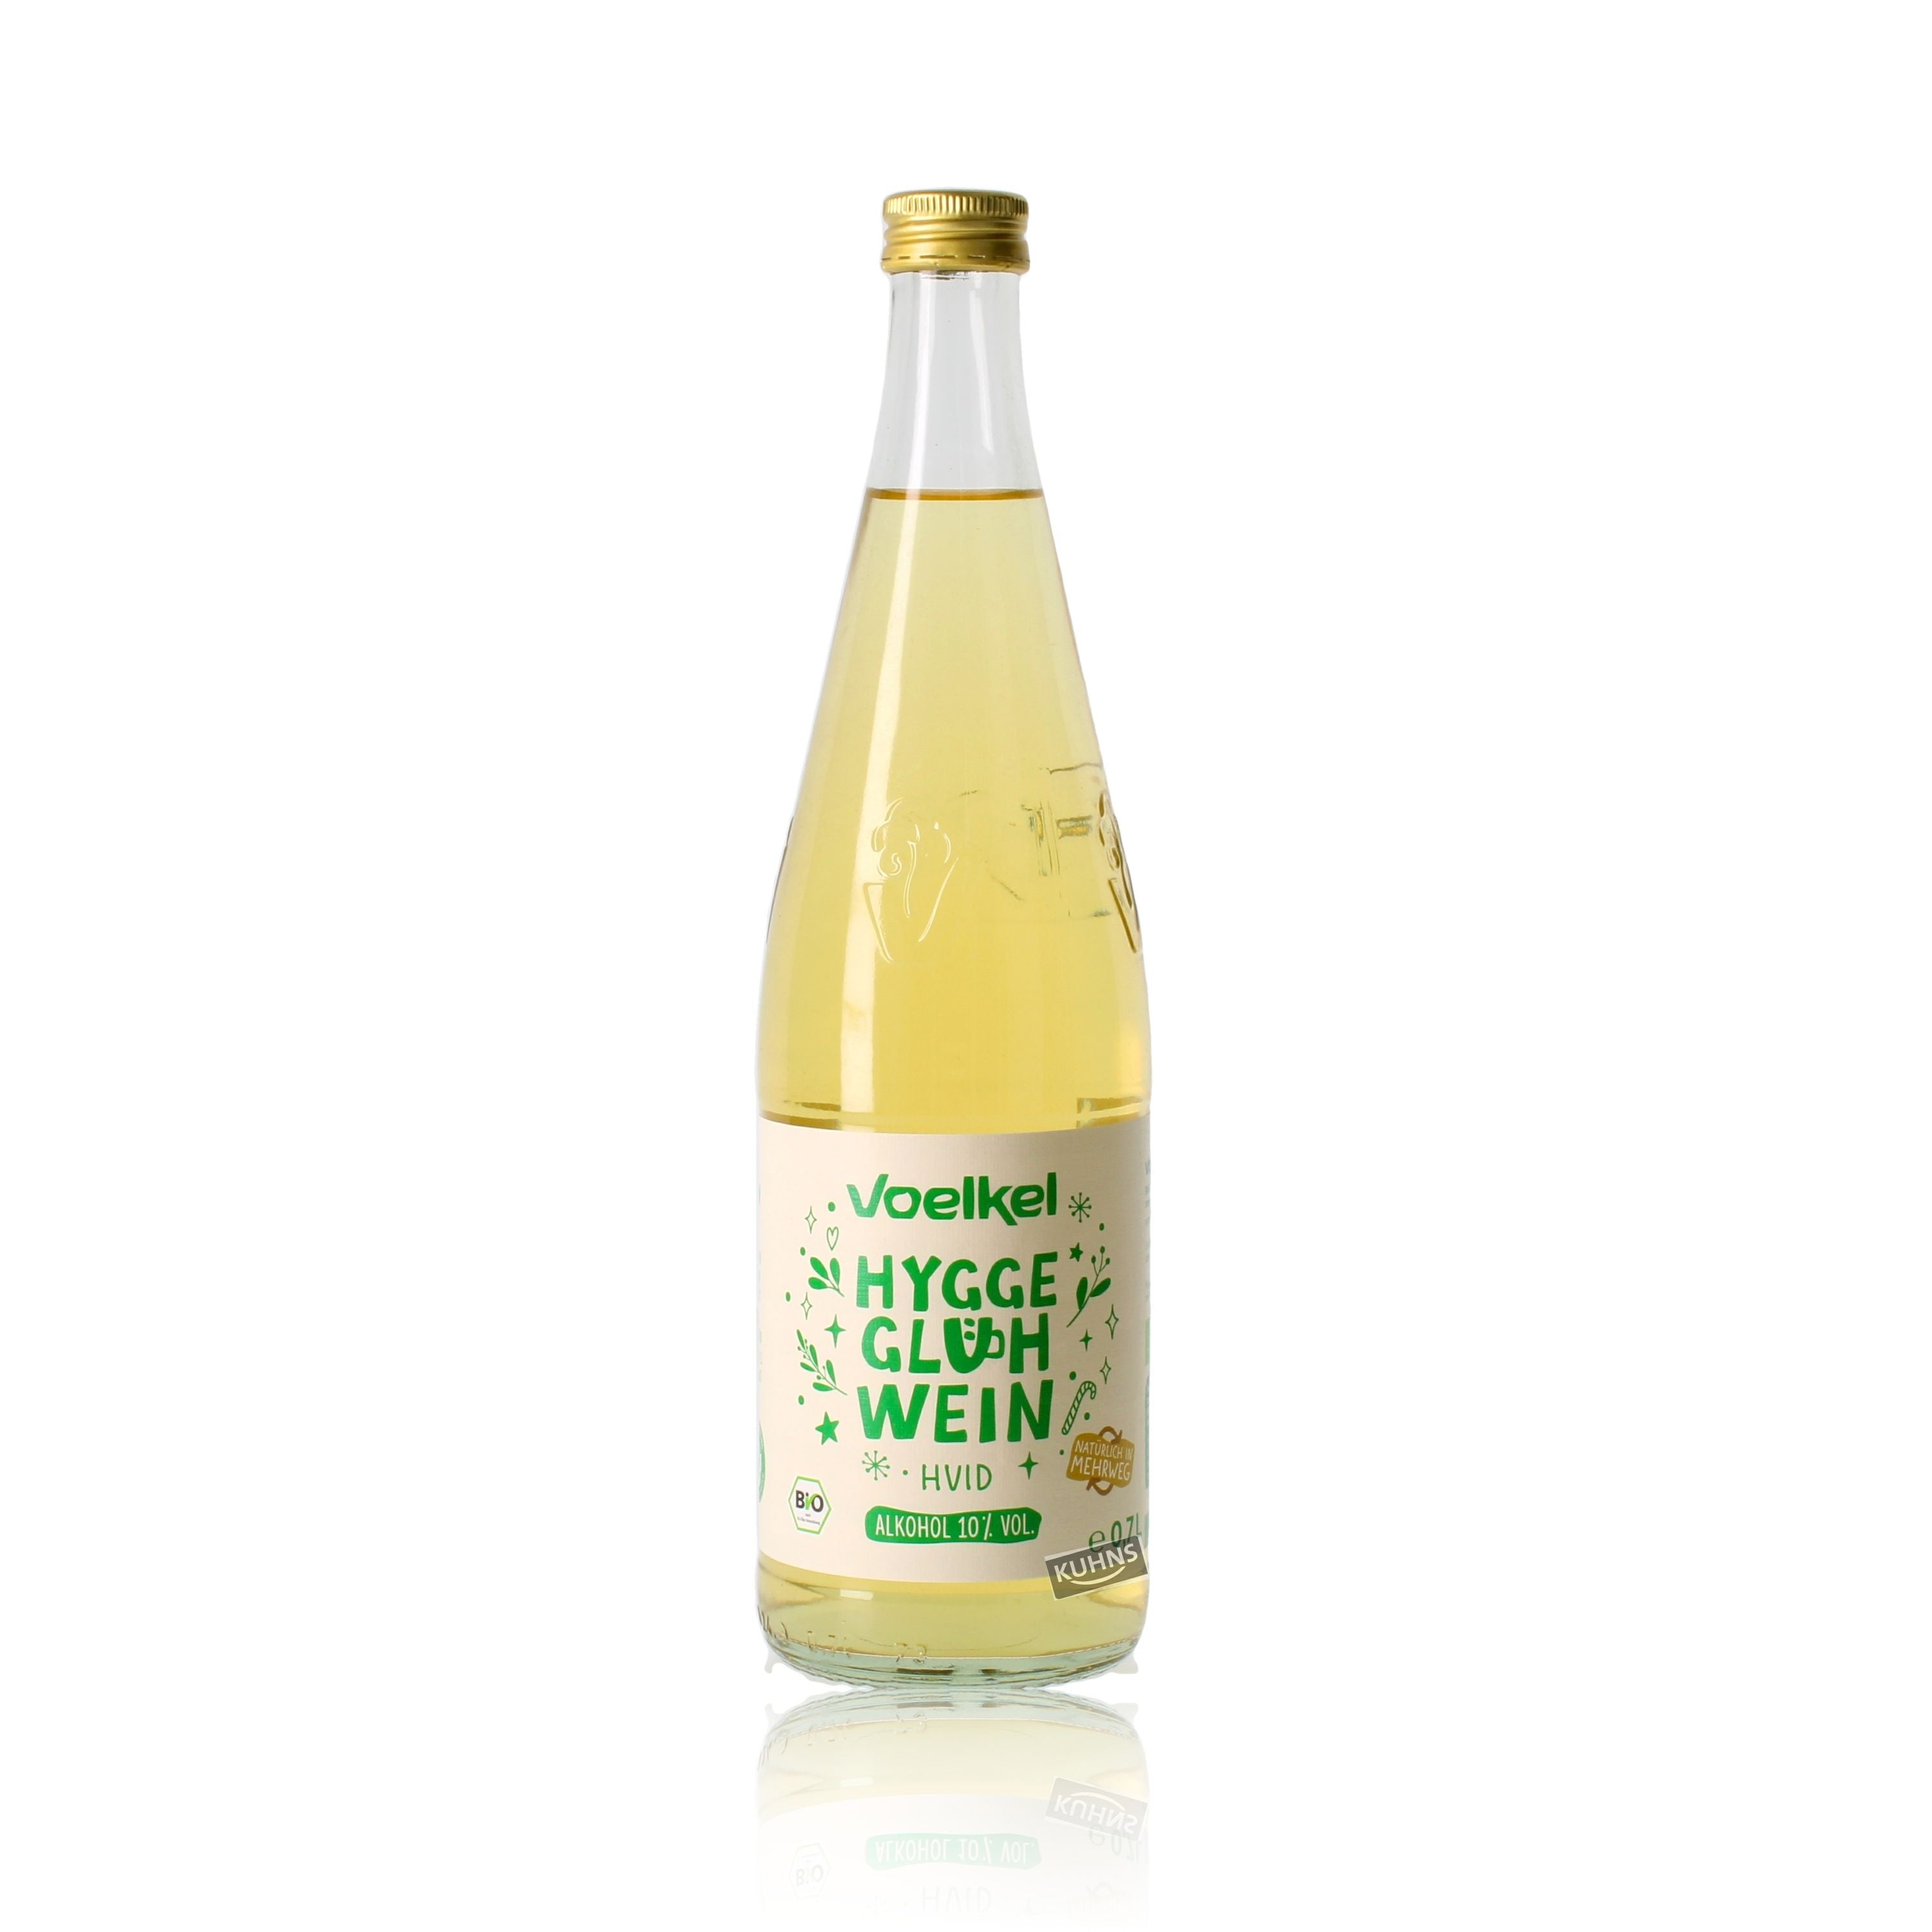 Voelkel Hygge Mulled Wine White 0.7l, alc. 10% by volume, mulled wine Germany